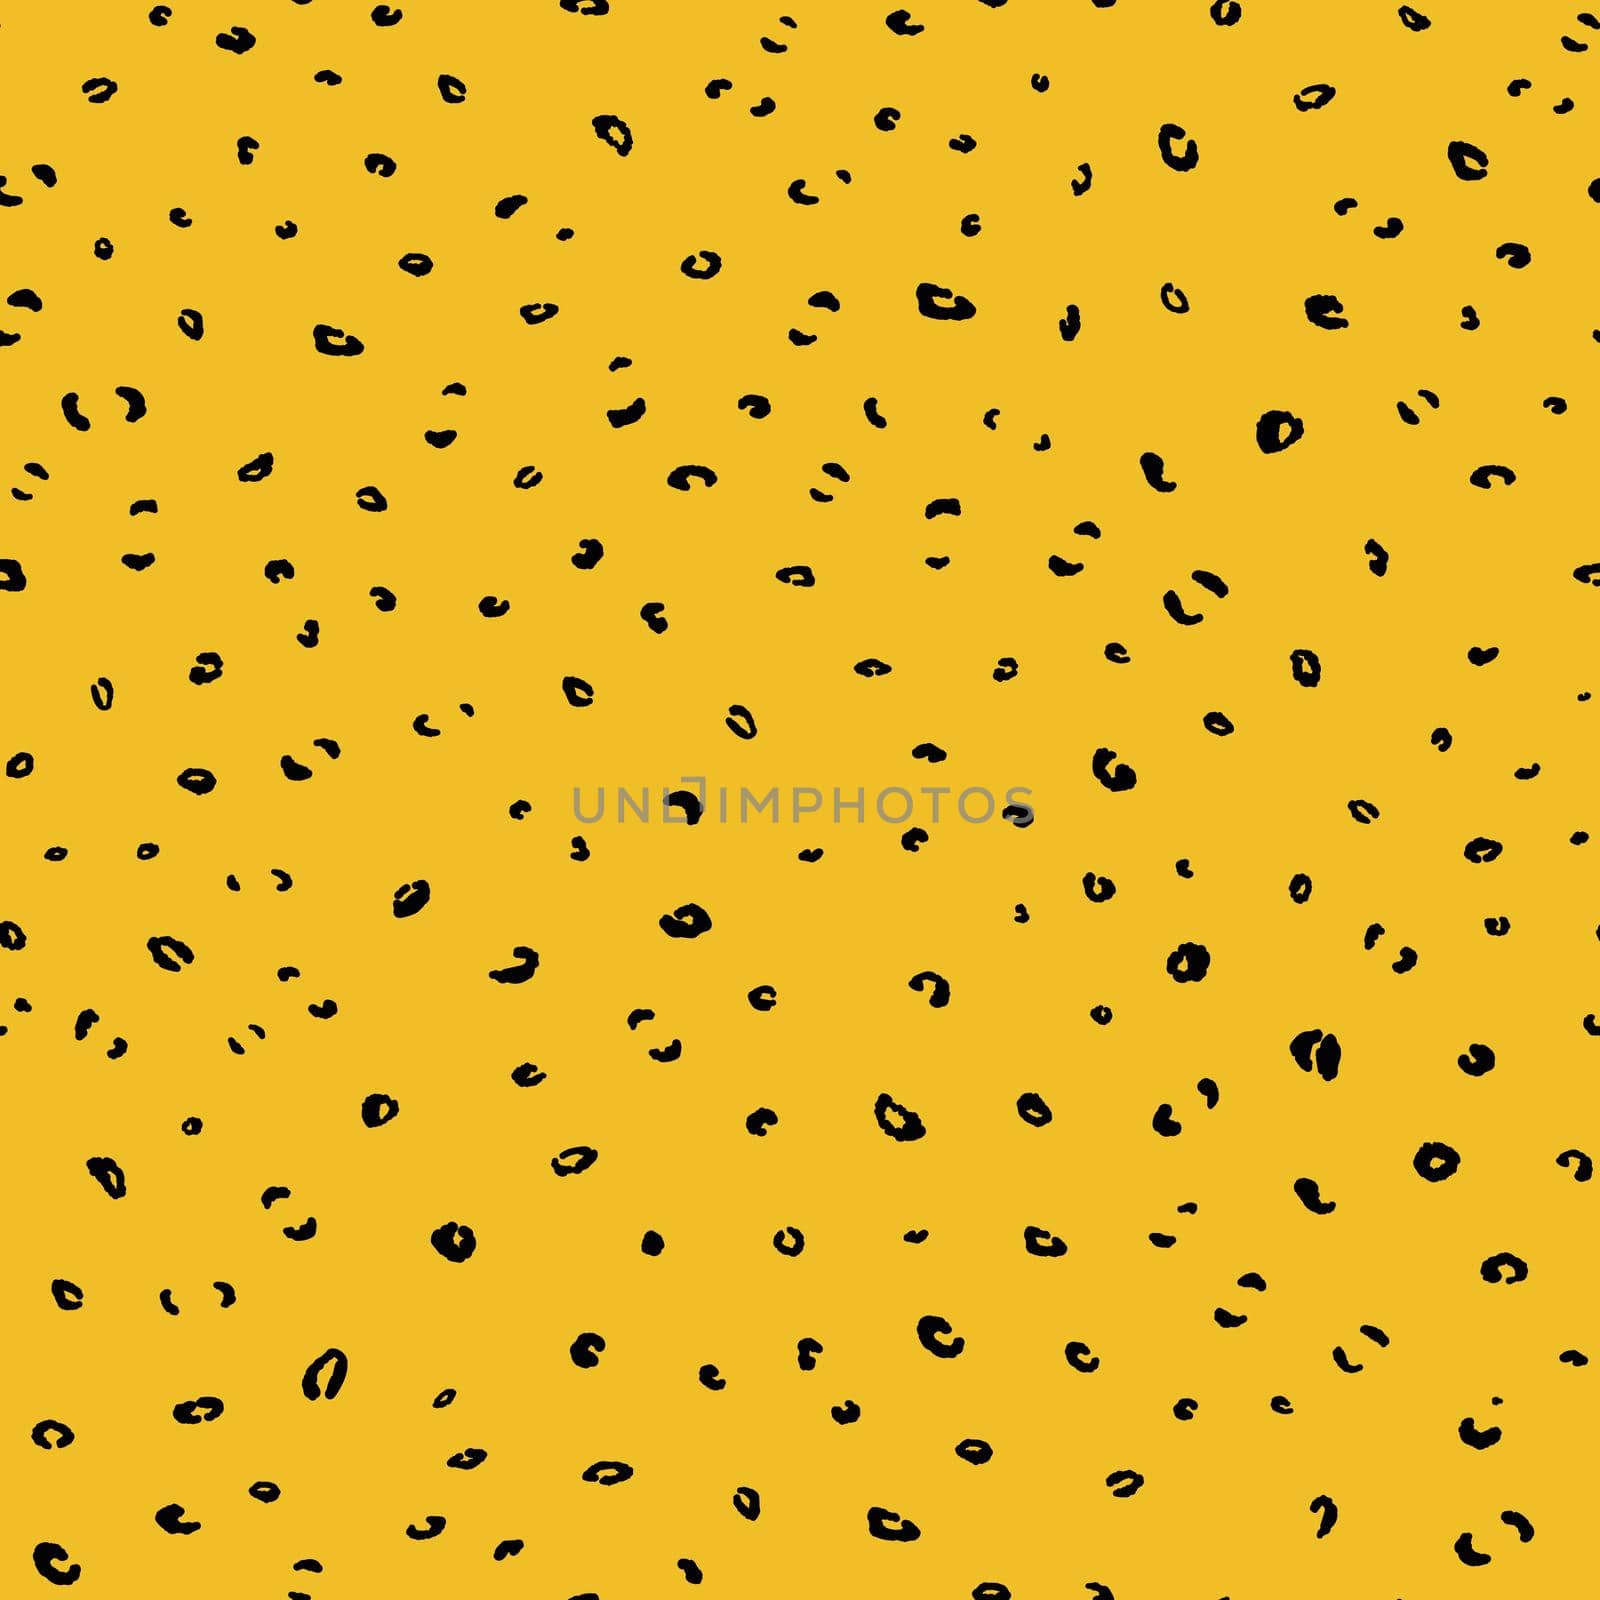 Abstract modern leopard seamless pattern. Animals trendy background. Yellow and black decorative vector stock illustration for print, card, postcard, fabric, textile. Modern ornament of stylized skin by allaku